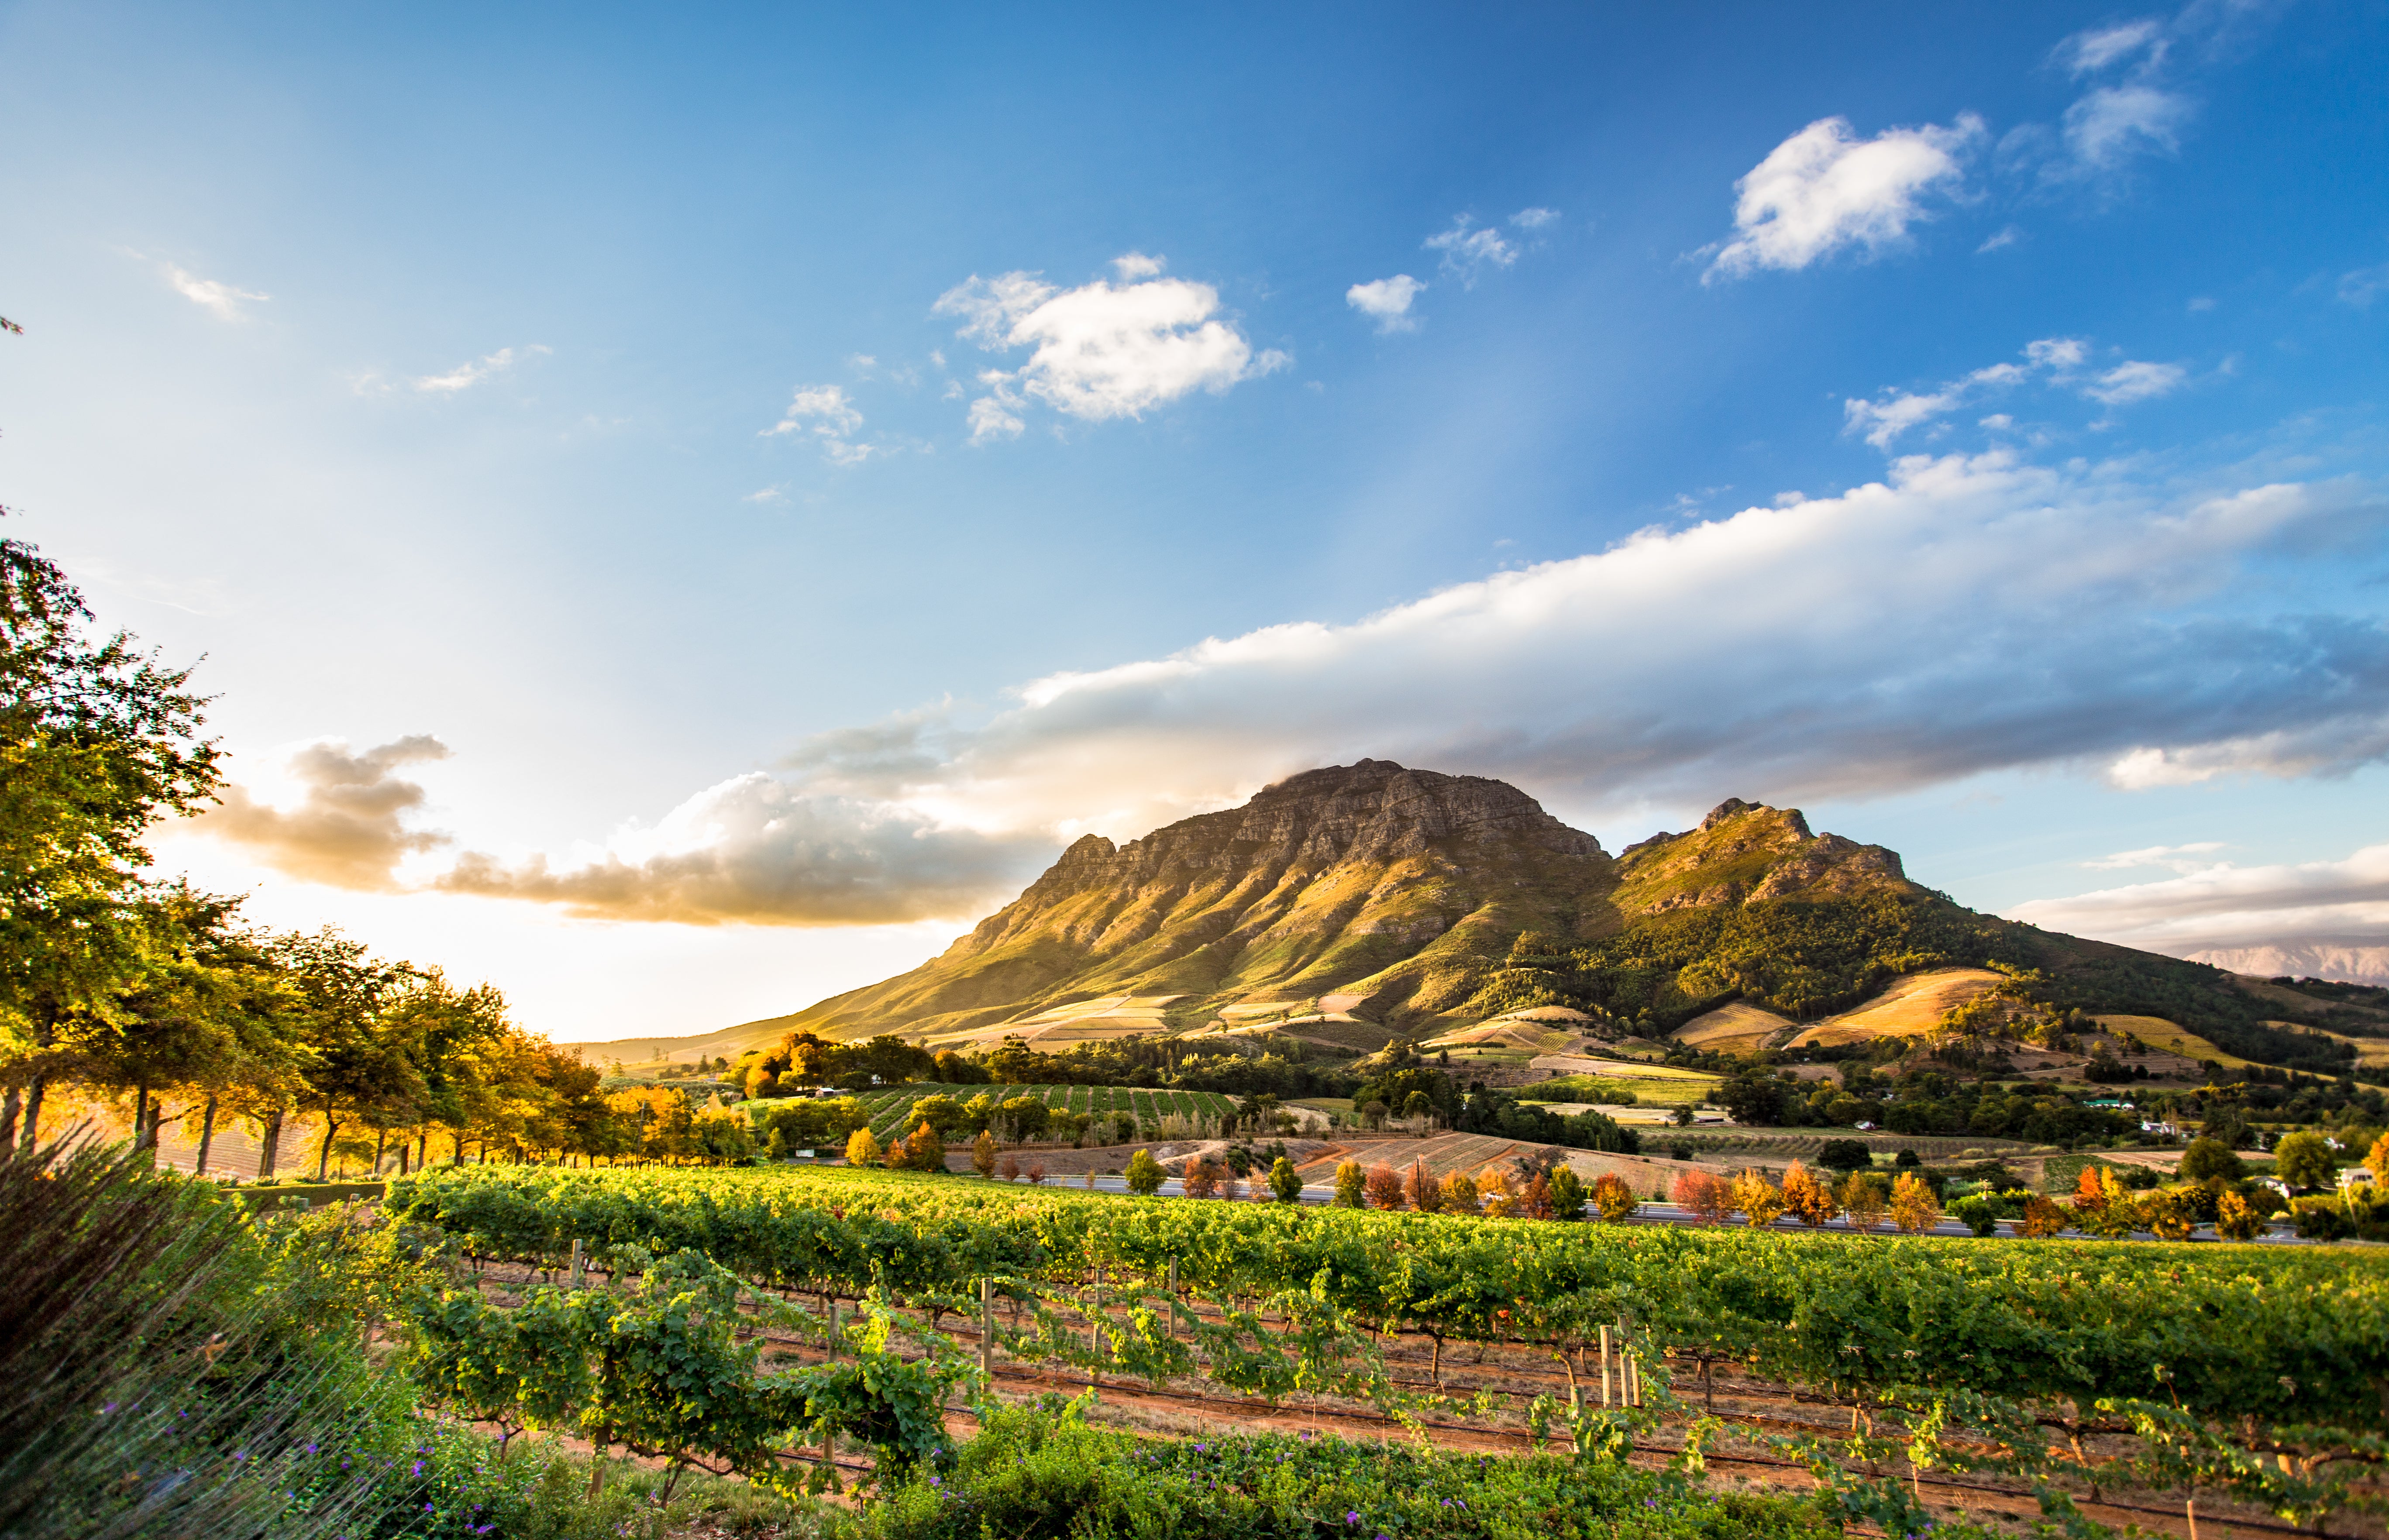 Discover South Africa’s stunning scenery